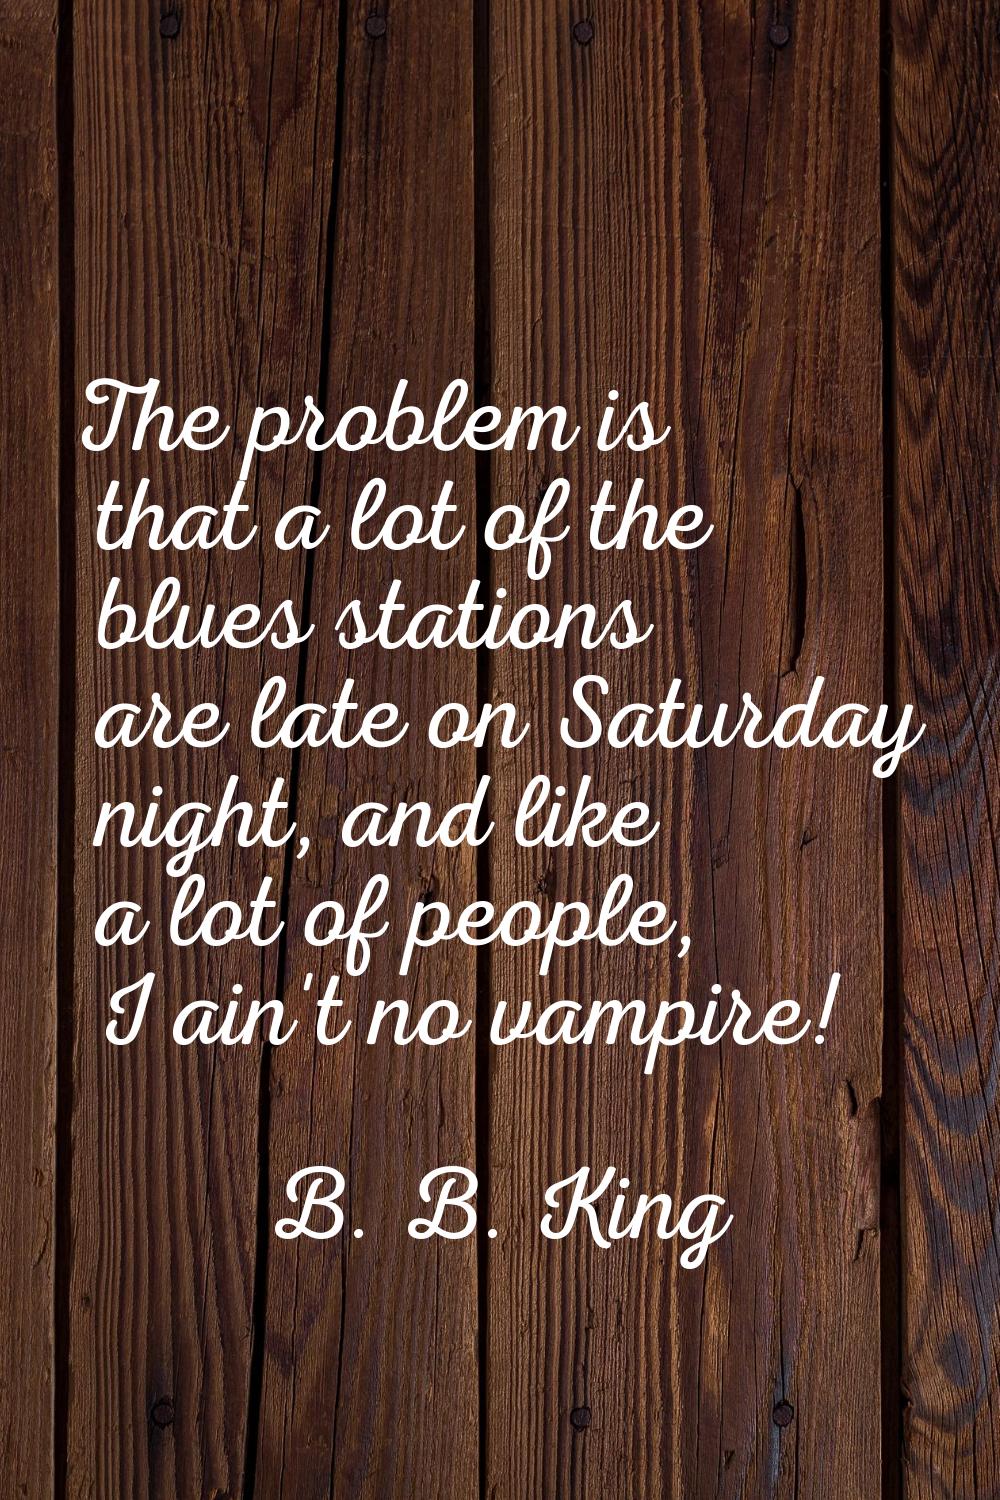 The problem is that a lot of the blues stations are late on Saturday night, and like a lot of peopl